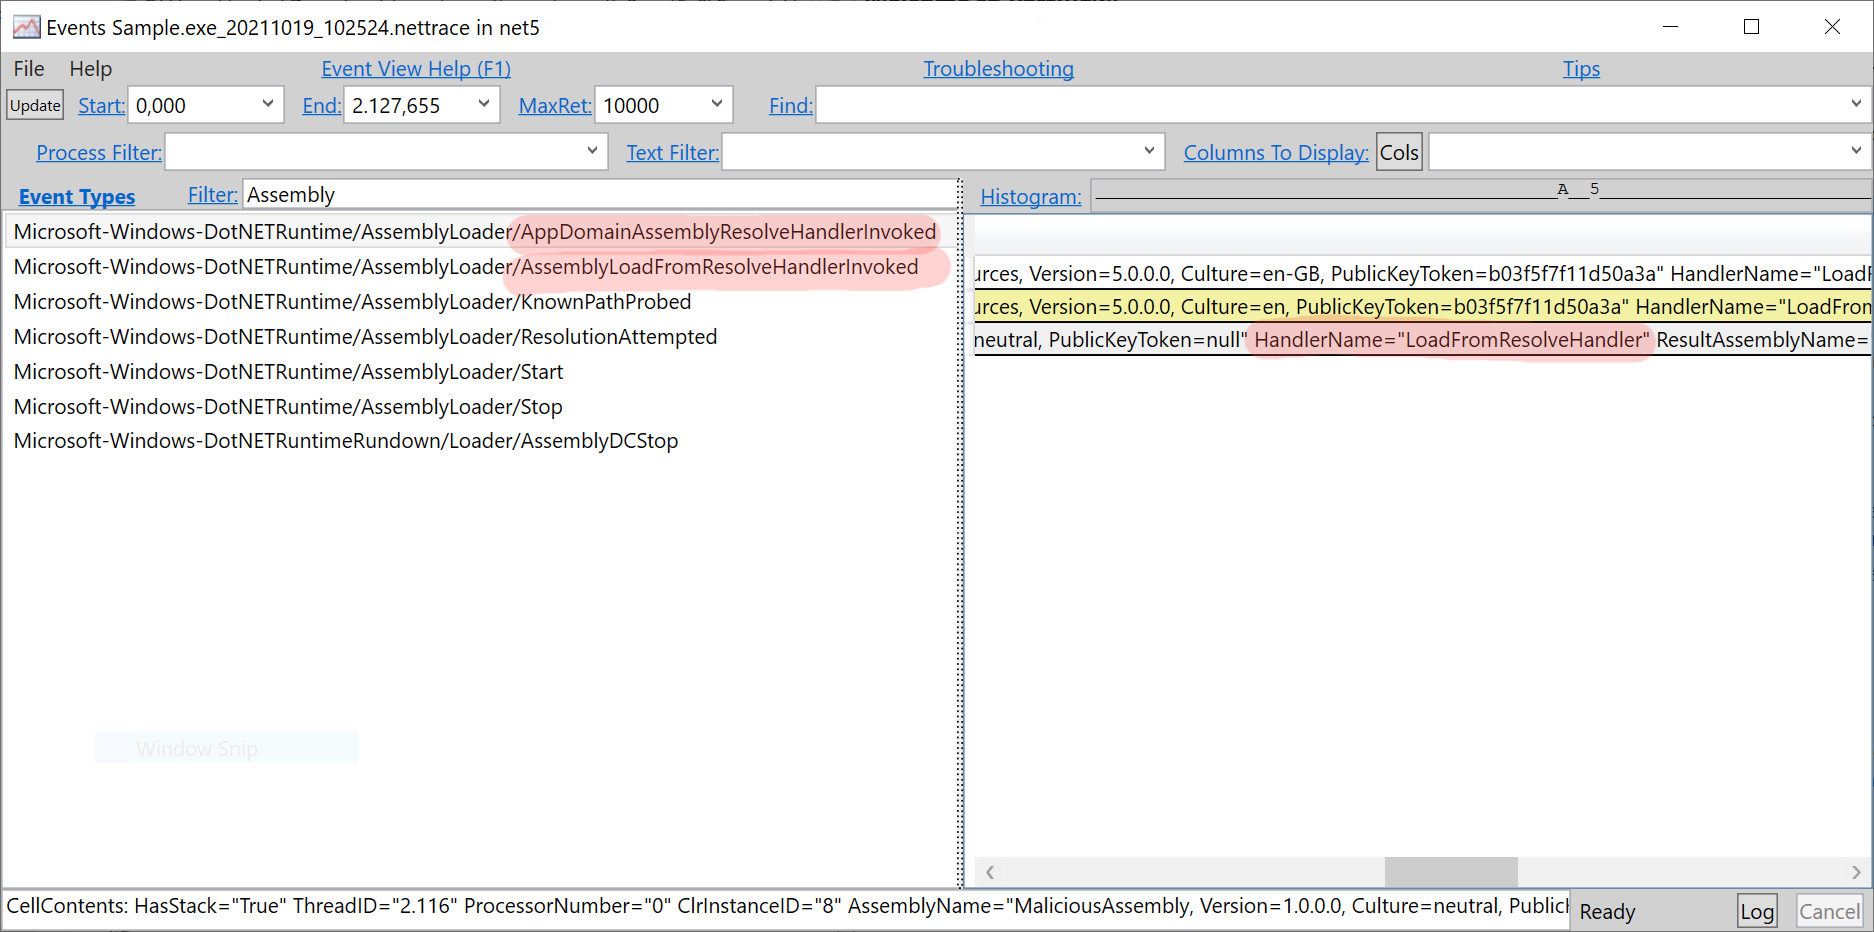 PerfView showing the AppDomainAssemblyResolveHandlerInvoked event